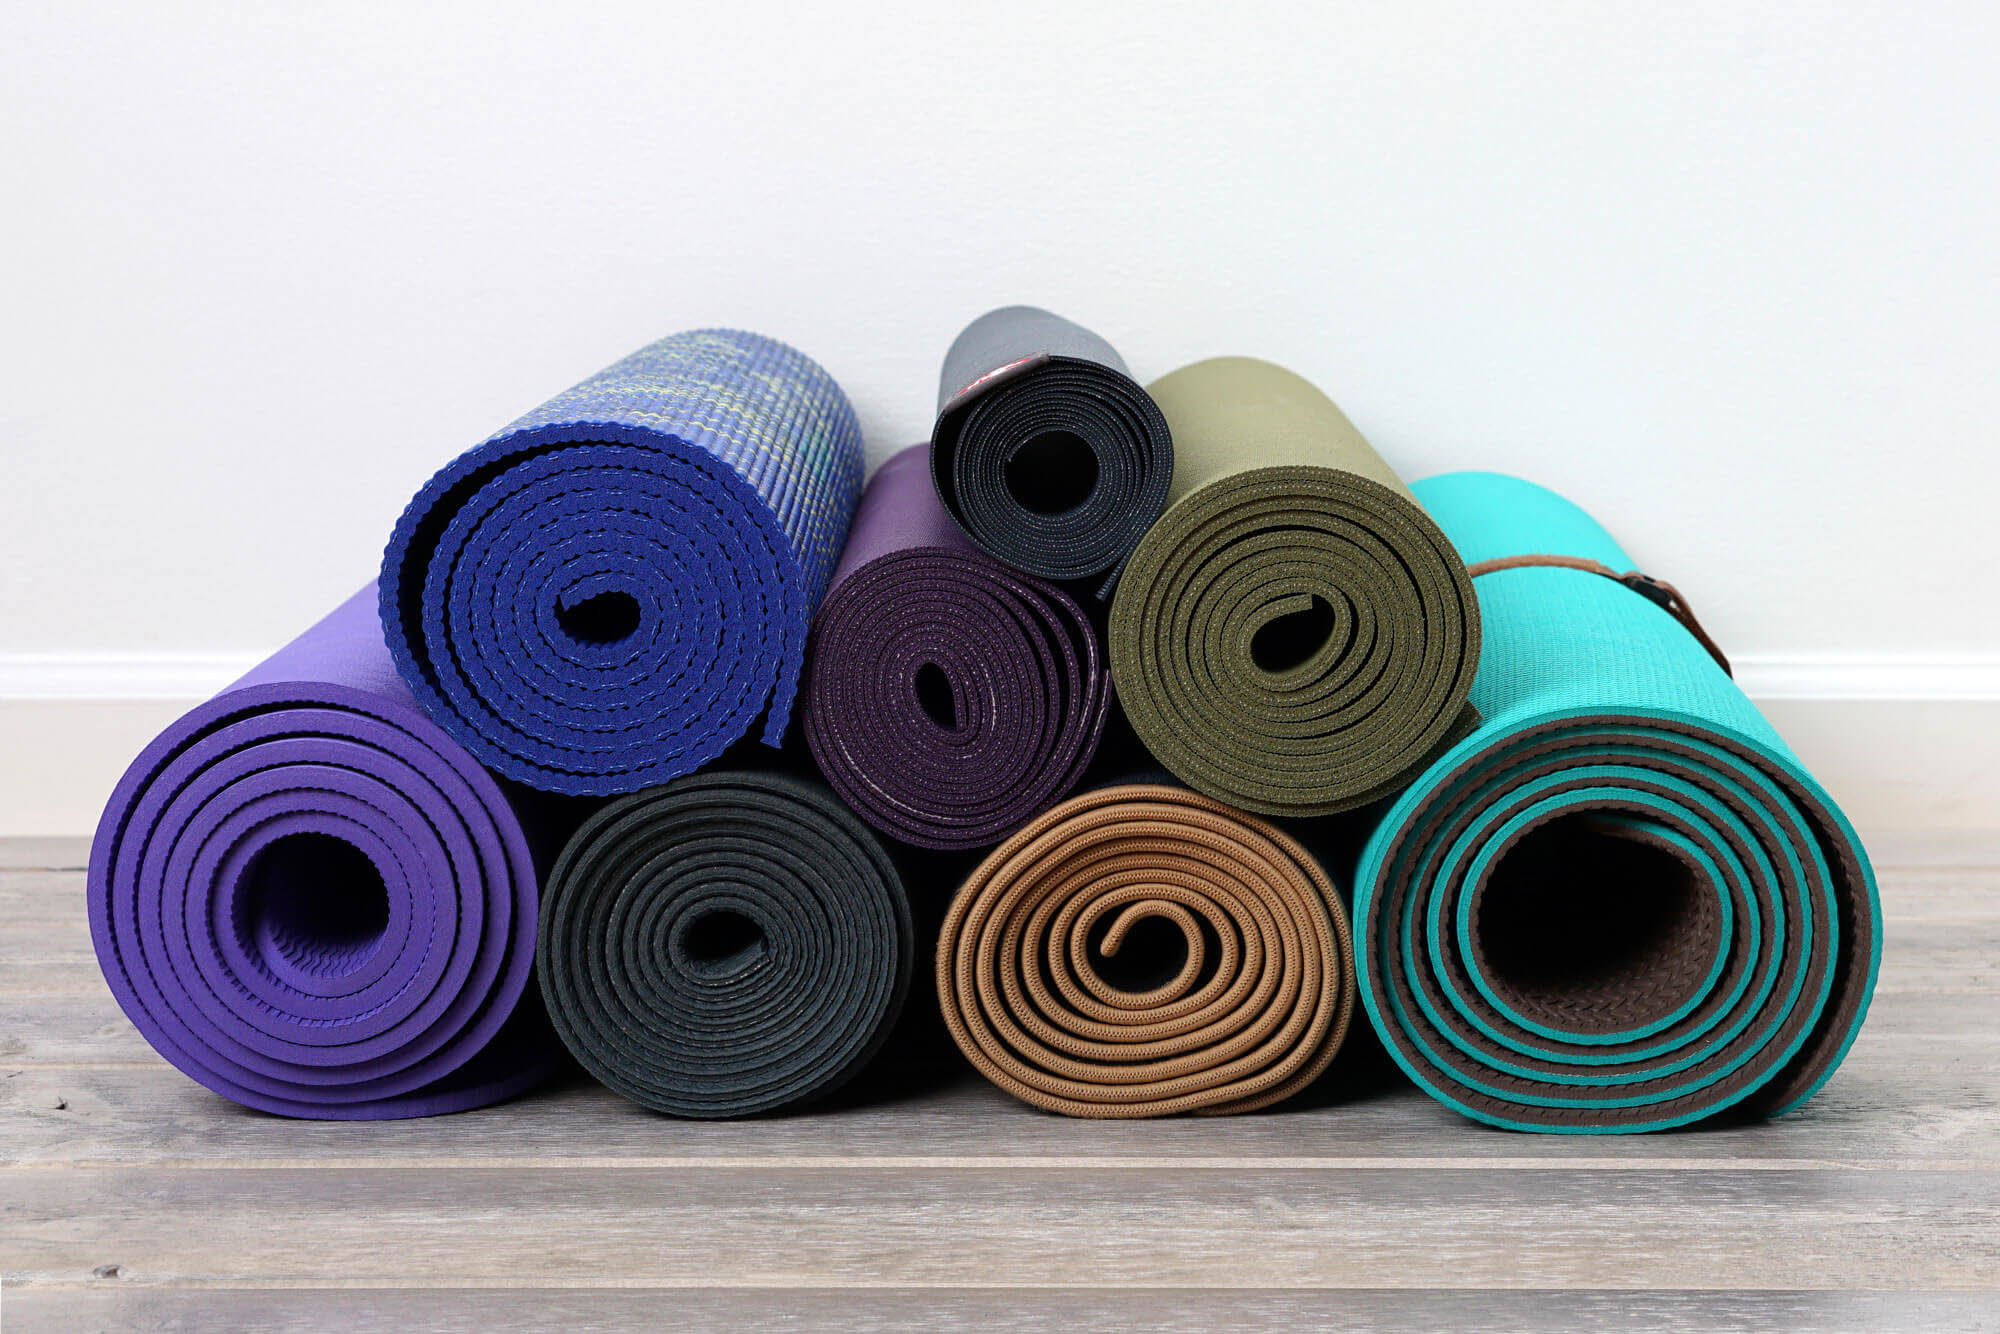 where to find cheap yoga mats